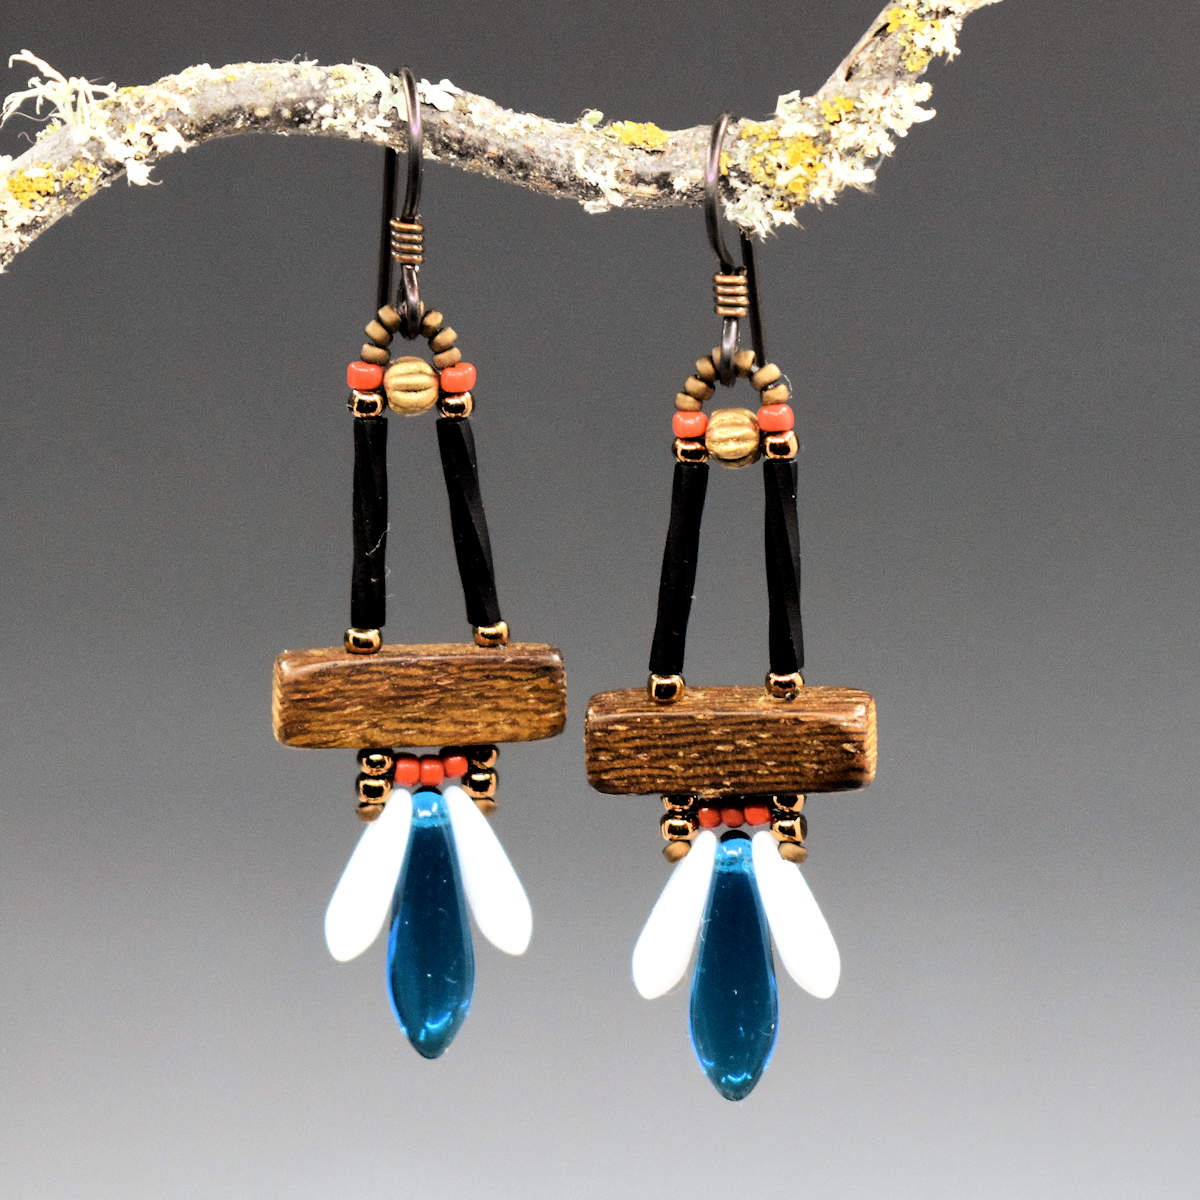 A pair of glass and wood earrings hang from a twisted twig. The earrings have a wooden rectangle suspended from two black tubes. Below the wood rectangle is a row of small coral-red beads and another row with a clear capri blue dagger sandwiched between two small white dagger beads.